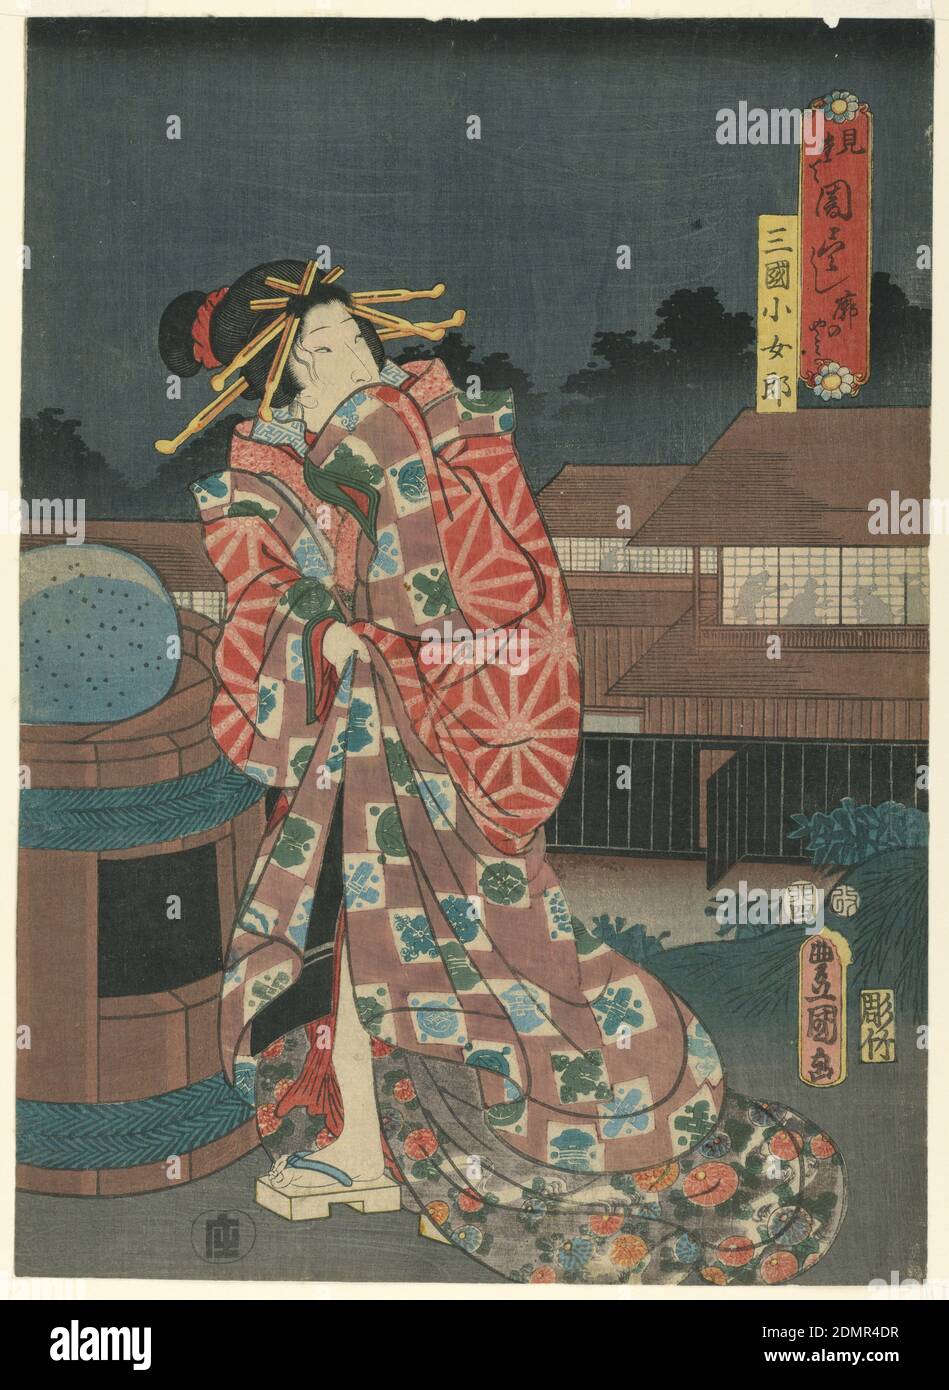 Geisha, Utagawa Kunisada, Japanese, 1786 – 1864, Woodblock print in colored ink on paper, Utagawa Kunisada is one of the lesser-known ukiyo-e printmakers, but he is no less talented than his contemporaries Hokusai and Hiroshige. Herem the architectural designs, wood mark in the night sky, and the magnitude of colors and prints in the geisha’s kimono are numerous examples as to how Kunisada is just as talented. Kunisada’s mostly known for depicting women, kabuki actors, and couples in the thrawls of lovemaking., Japan, 1855, theater, Print Stock Photo